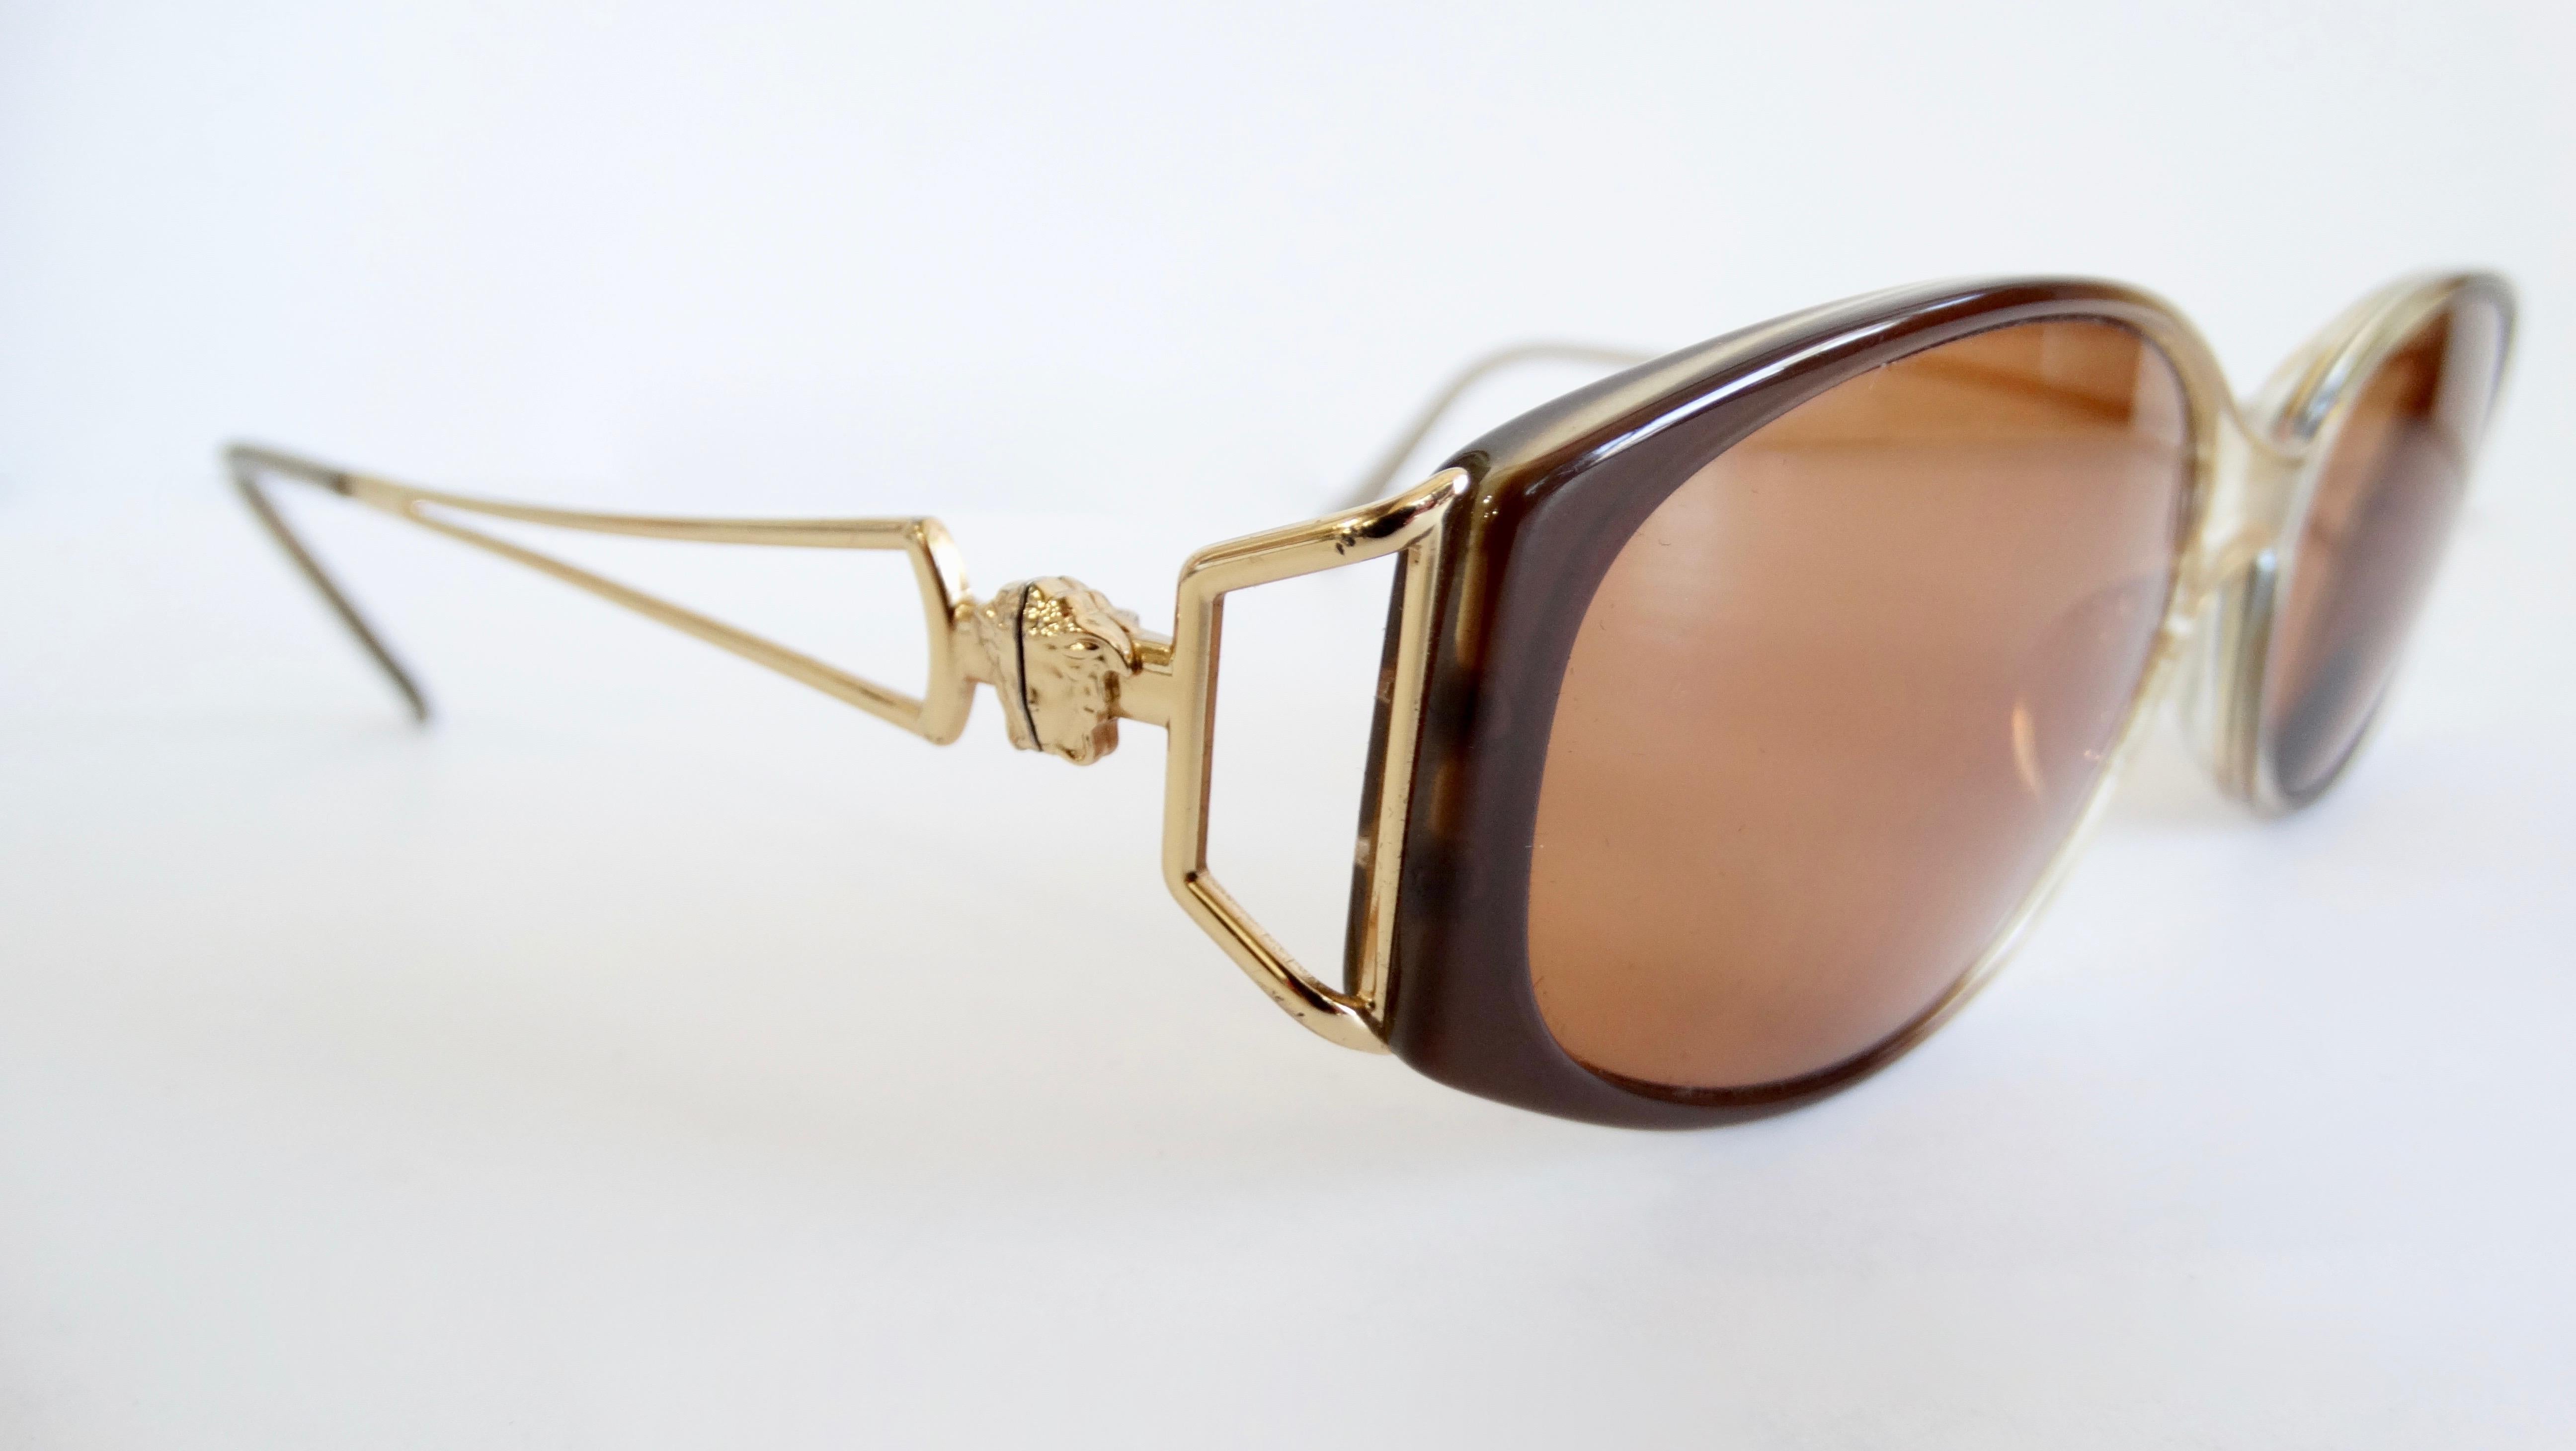 Gianni Versace 1990s Gradient Frame Sunglasses  For Sale 4